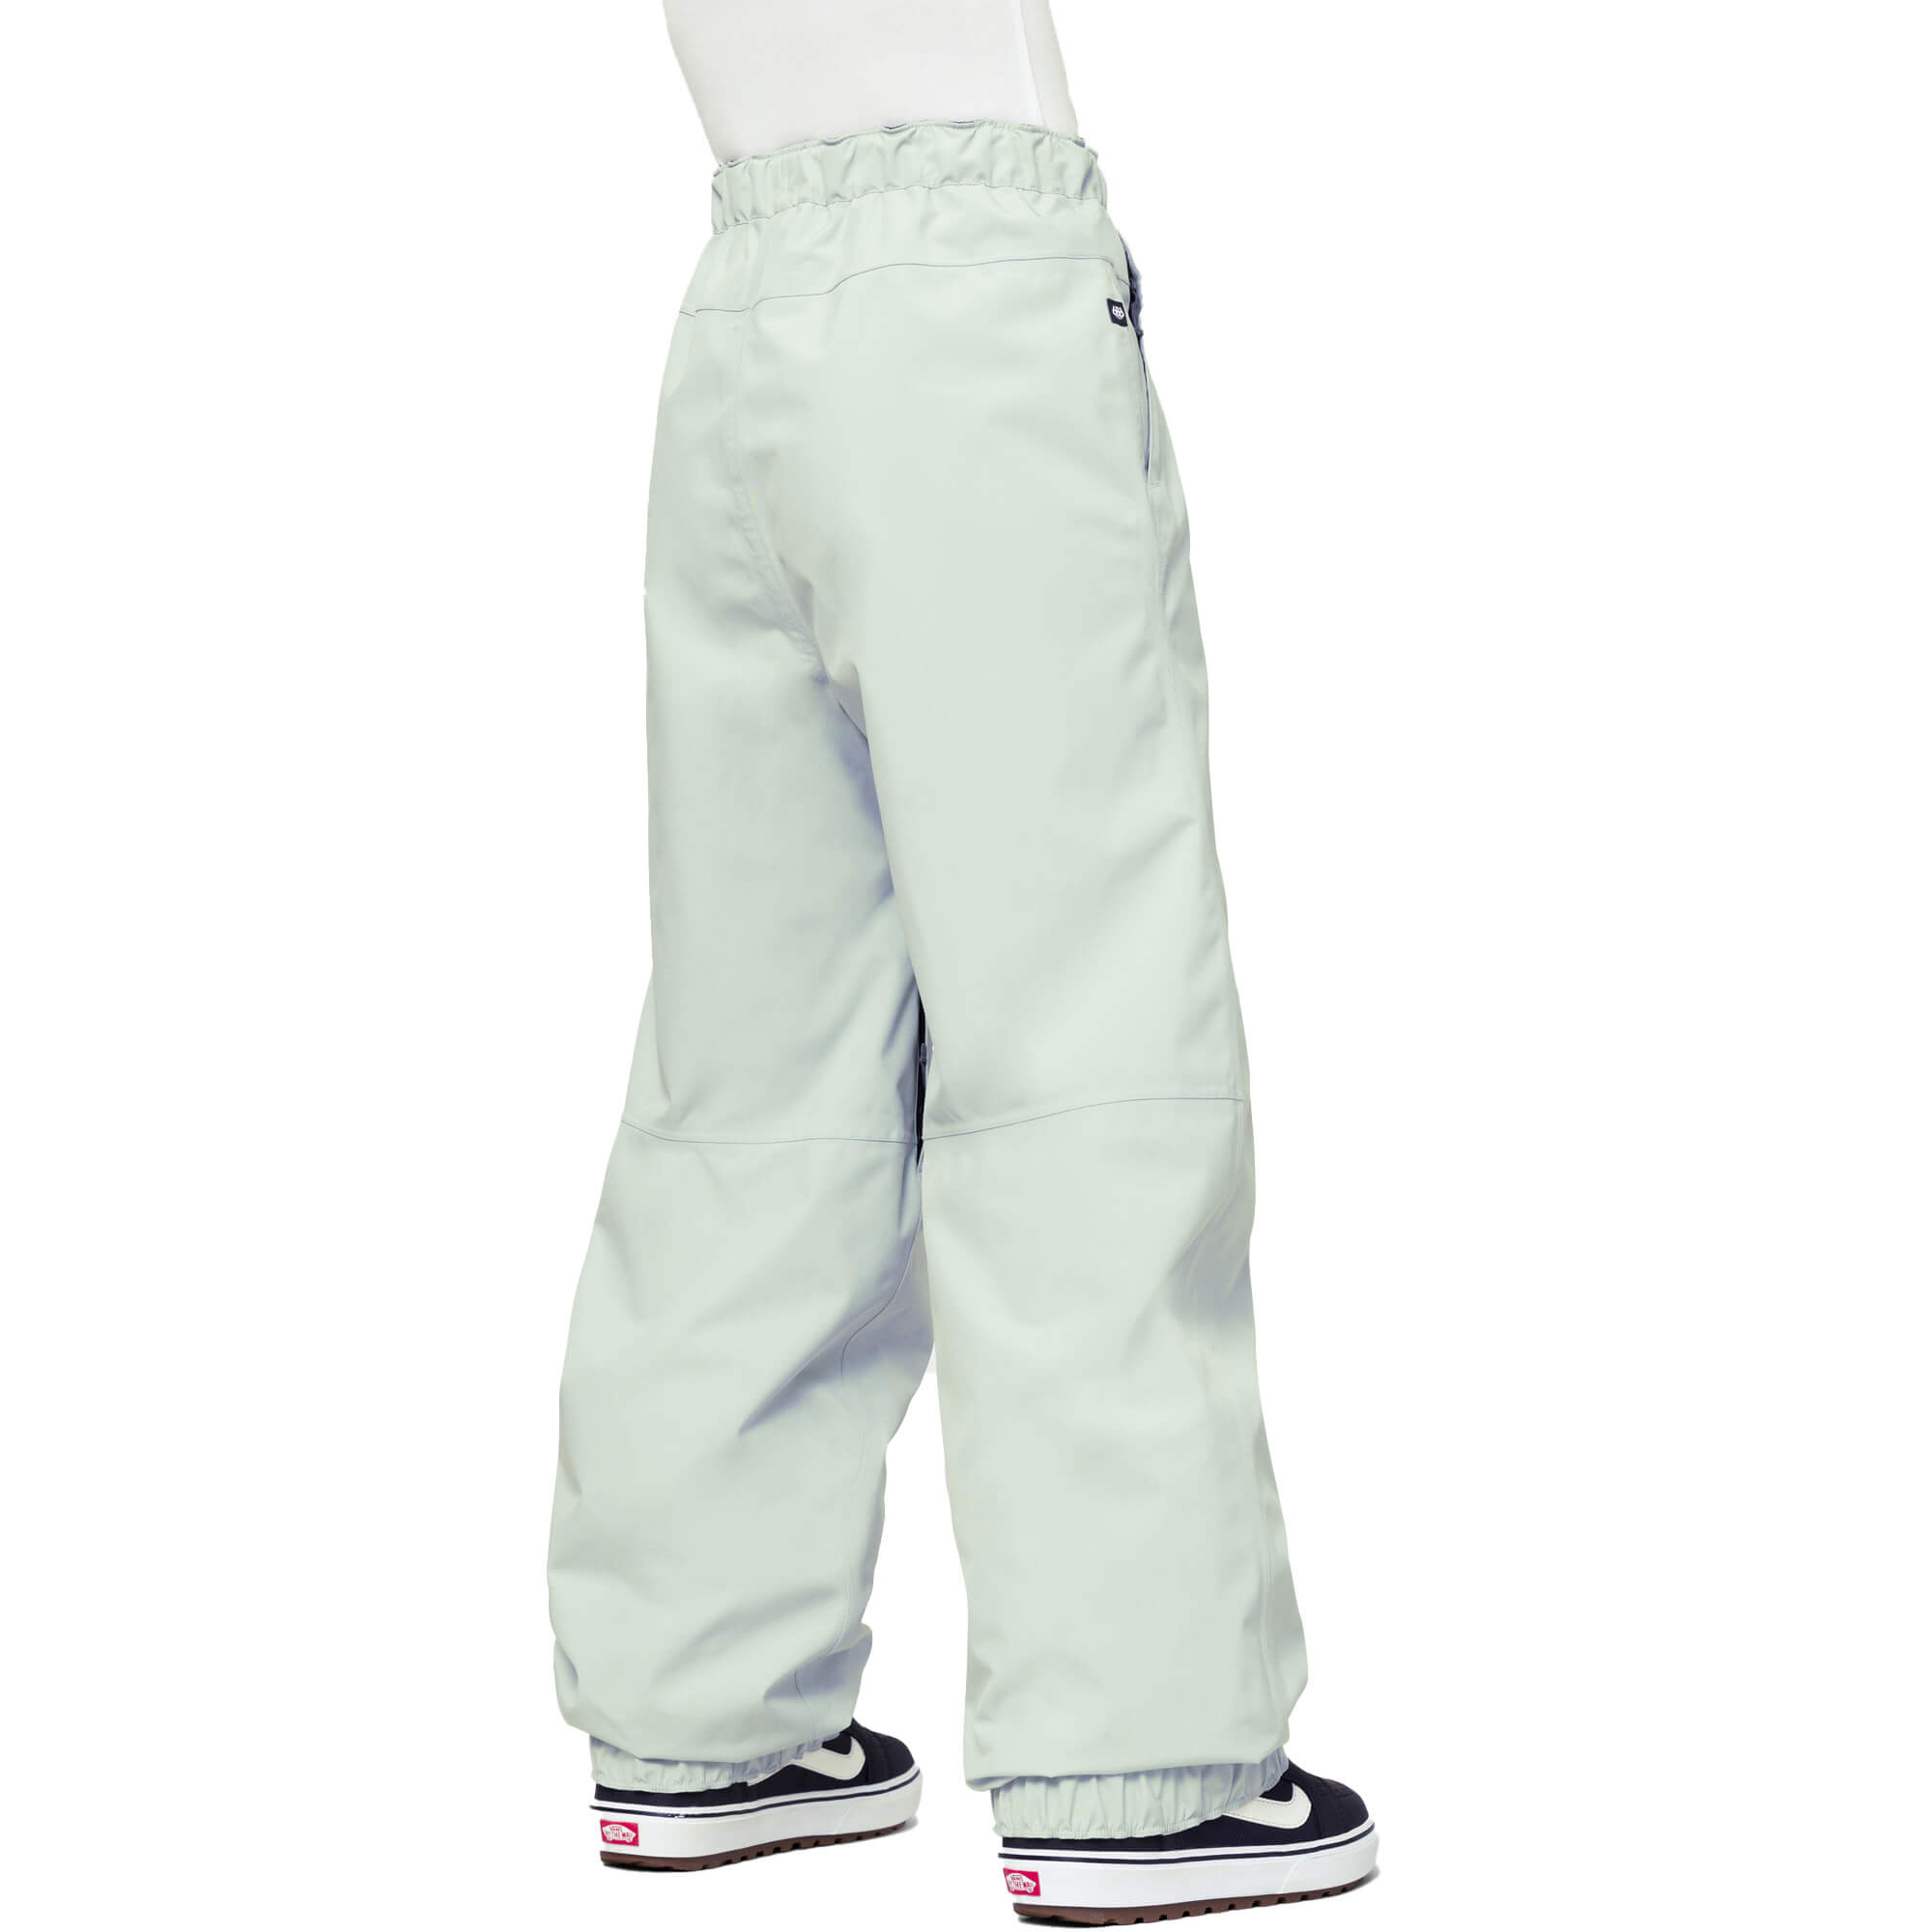 686 Outline Pant Women's Snowboard/Ski Trousers